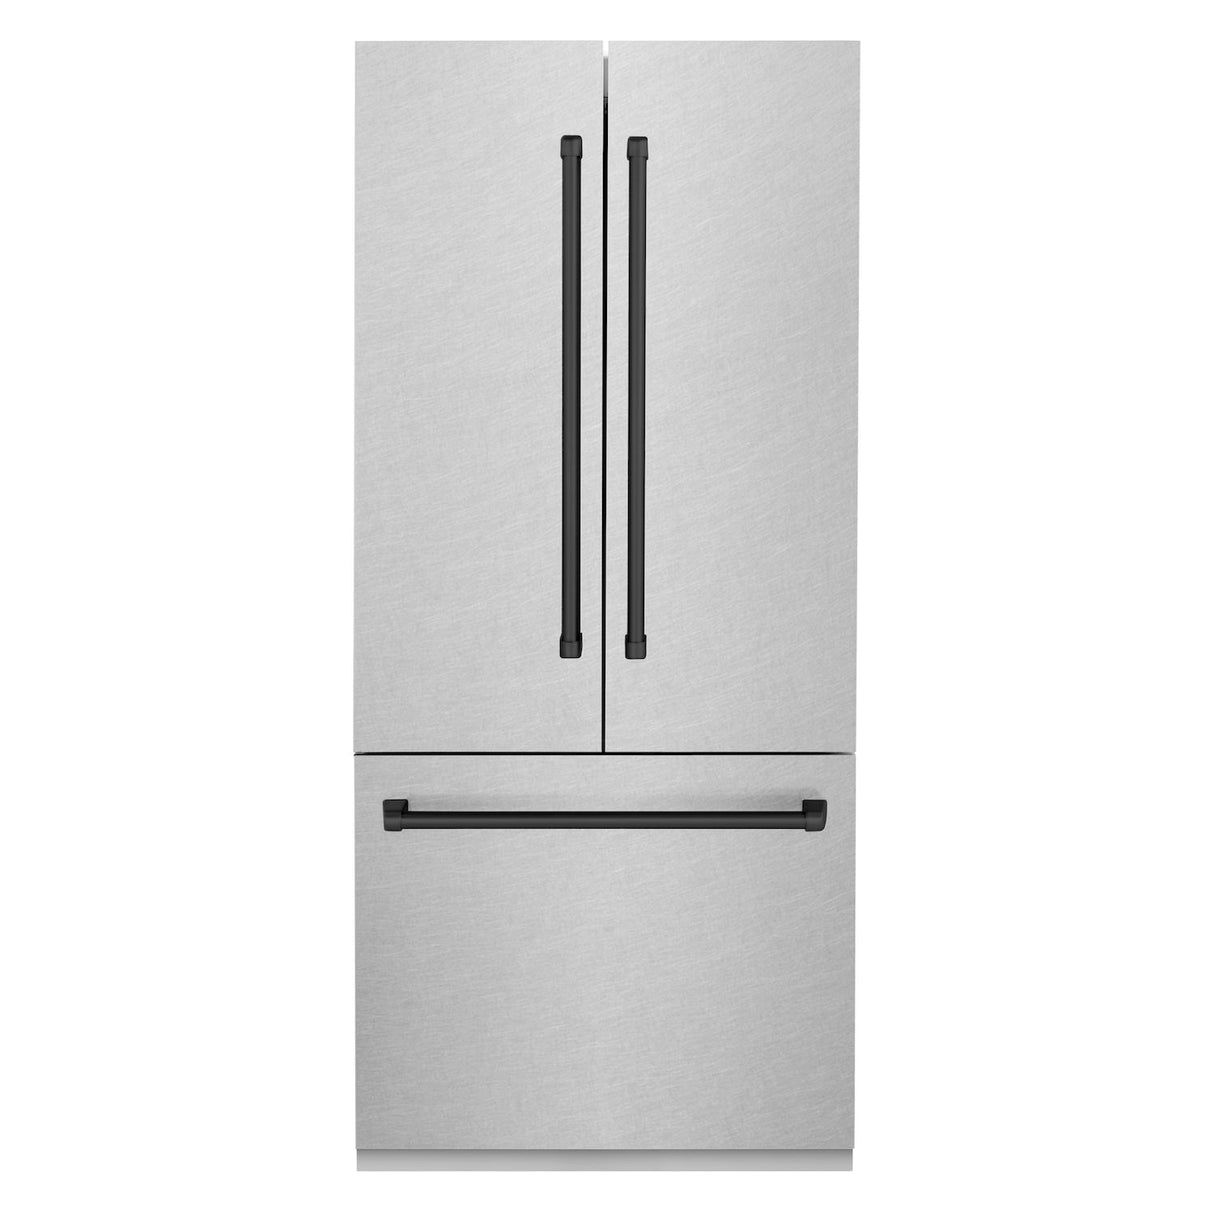 ZLINE Autograph Edition 36 in. 19.6 cu. ft. Built-in 2-Door Bottom Freezer Refrigerator with Internal Water and Ice Dispenser in Fingerprint Resistant Stainless Steel with Matte Black Accents (RBIVZ-SN-36-MB)